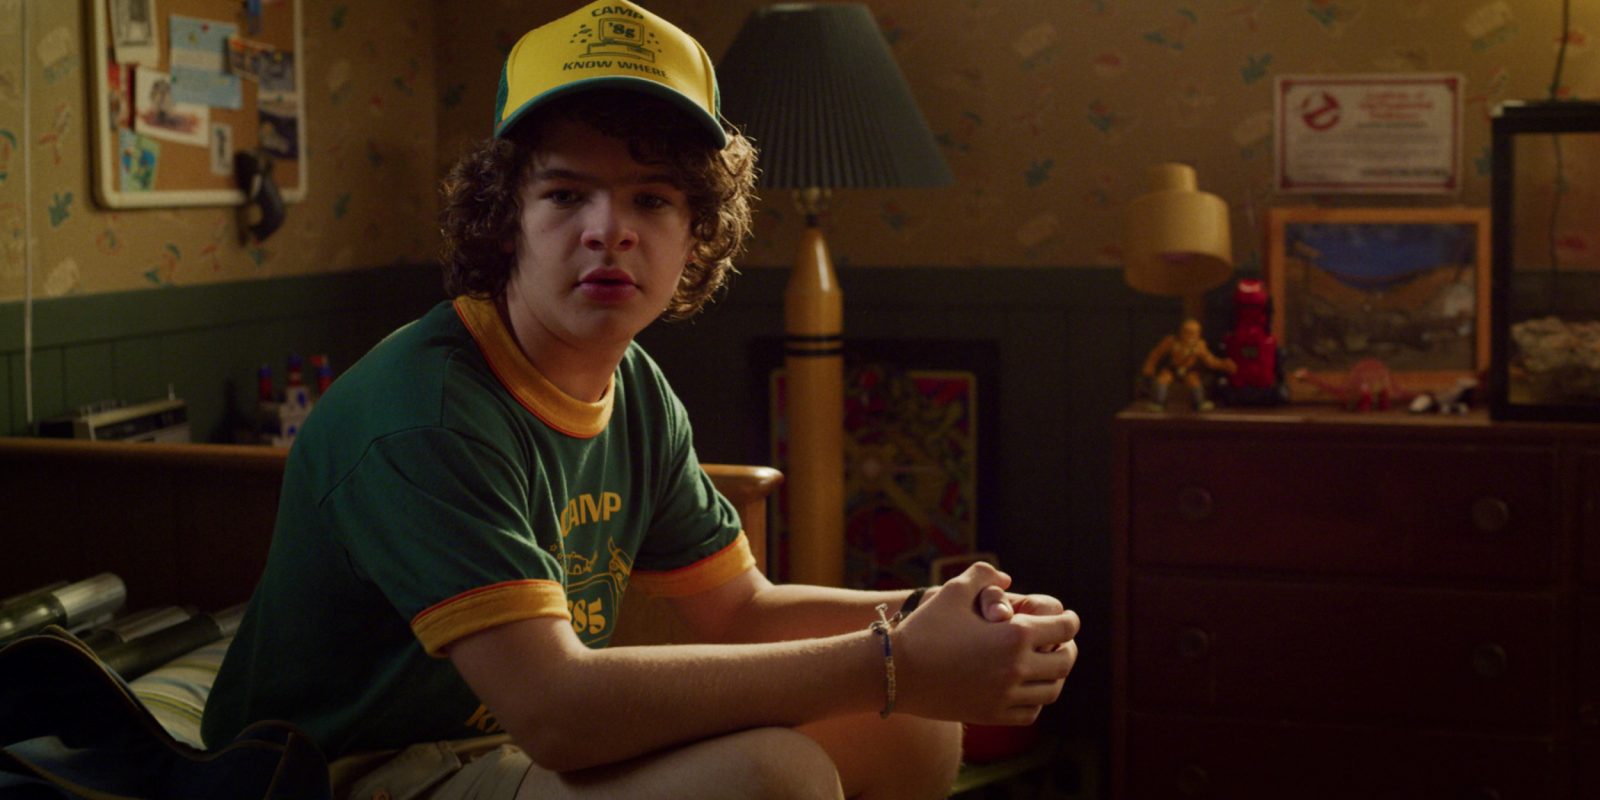 Which Stranger Things Season 3 Character Are You? Dustin Stranger Things Season 3